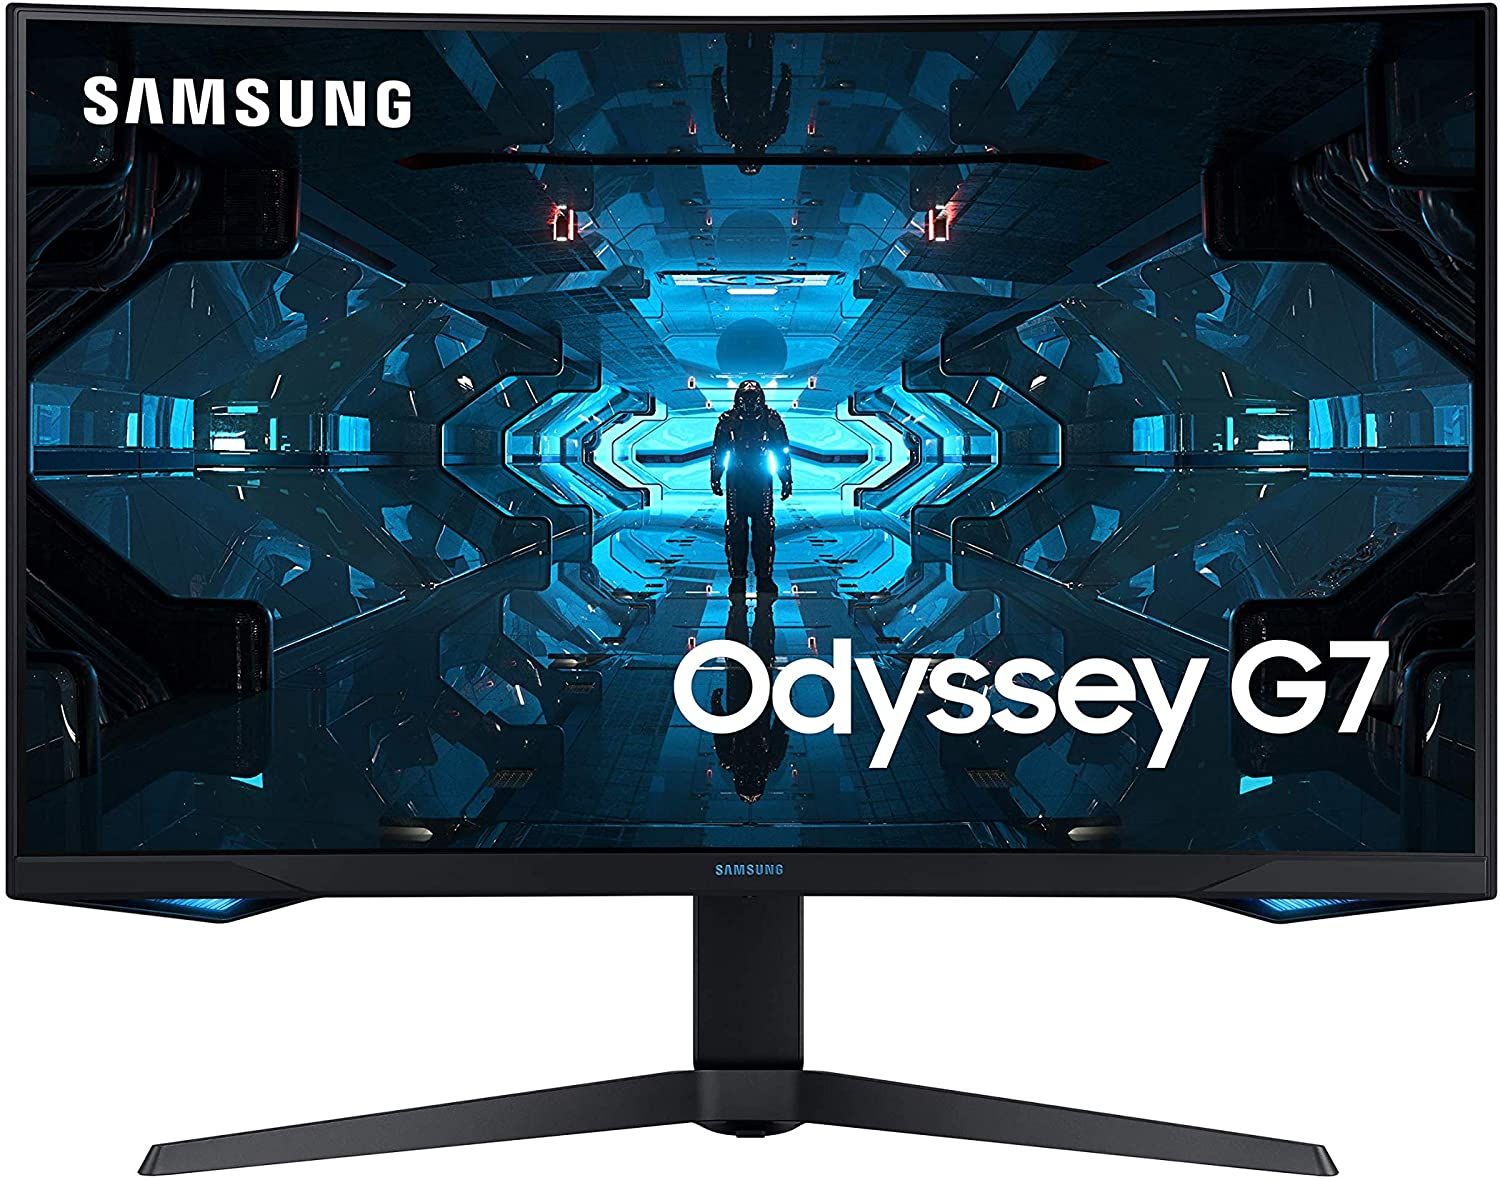 Samsung Odyssey G7 product image of a curved black monitor with a Sci-Fi walkway lit up in blue on the display.